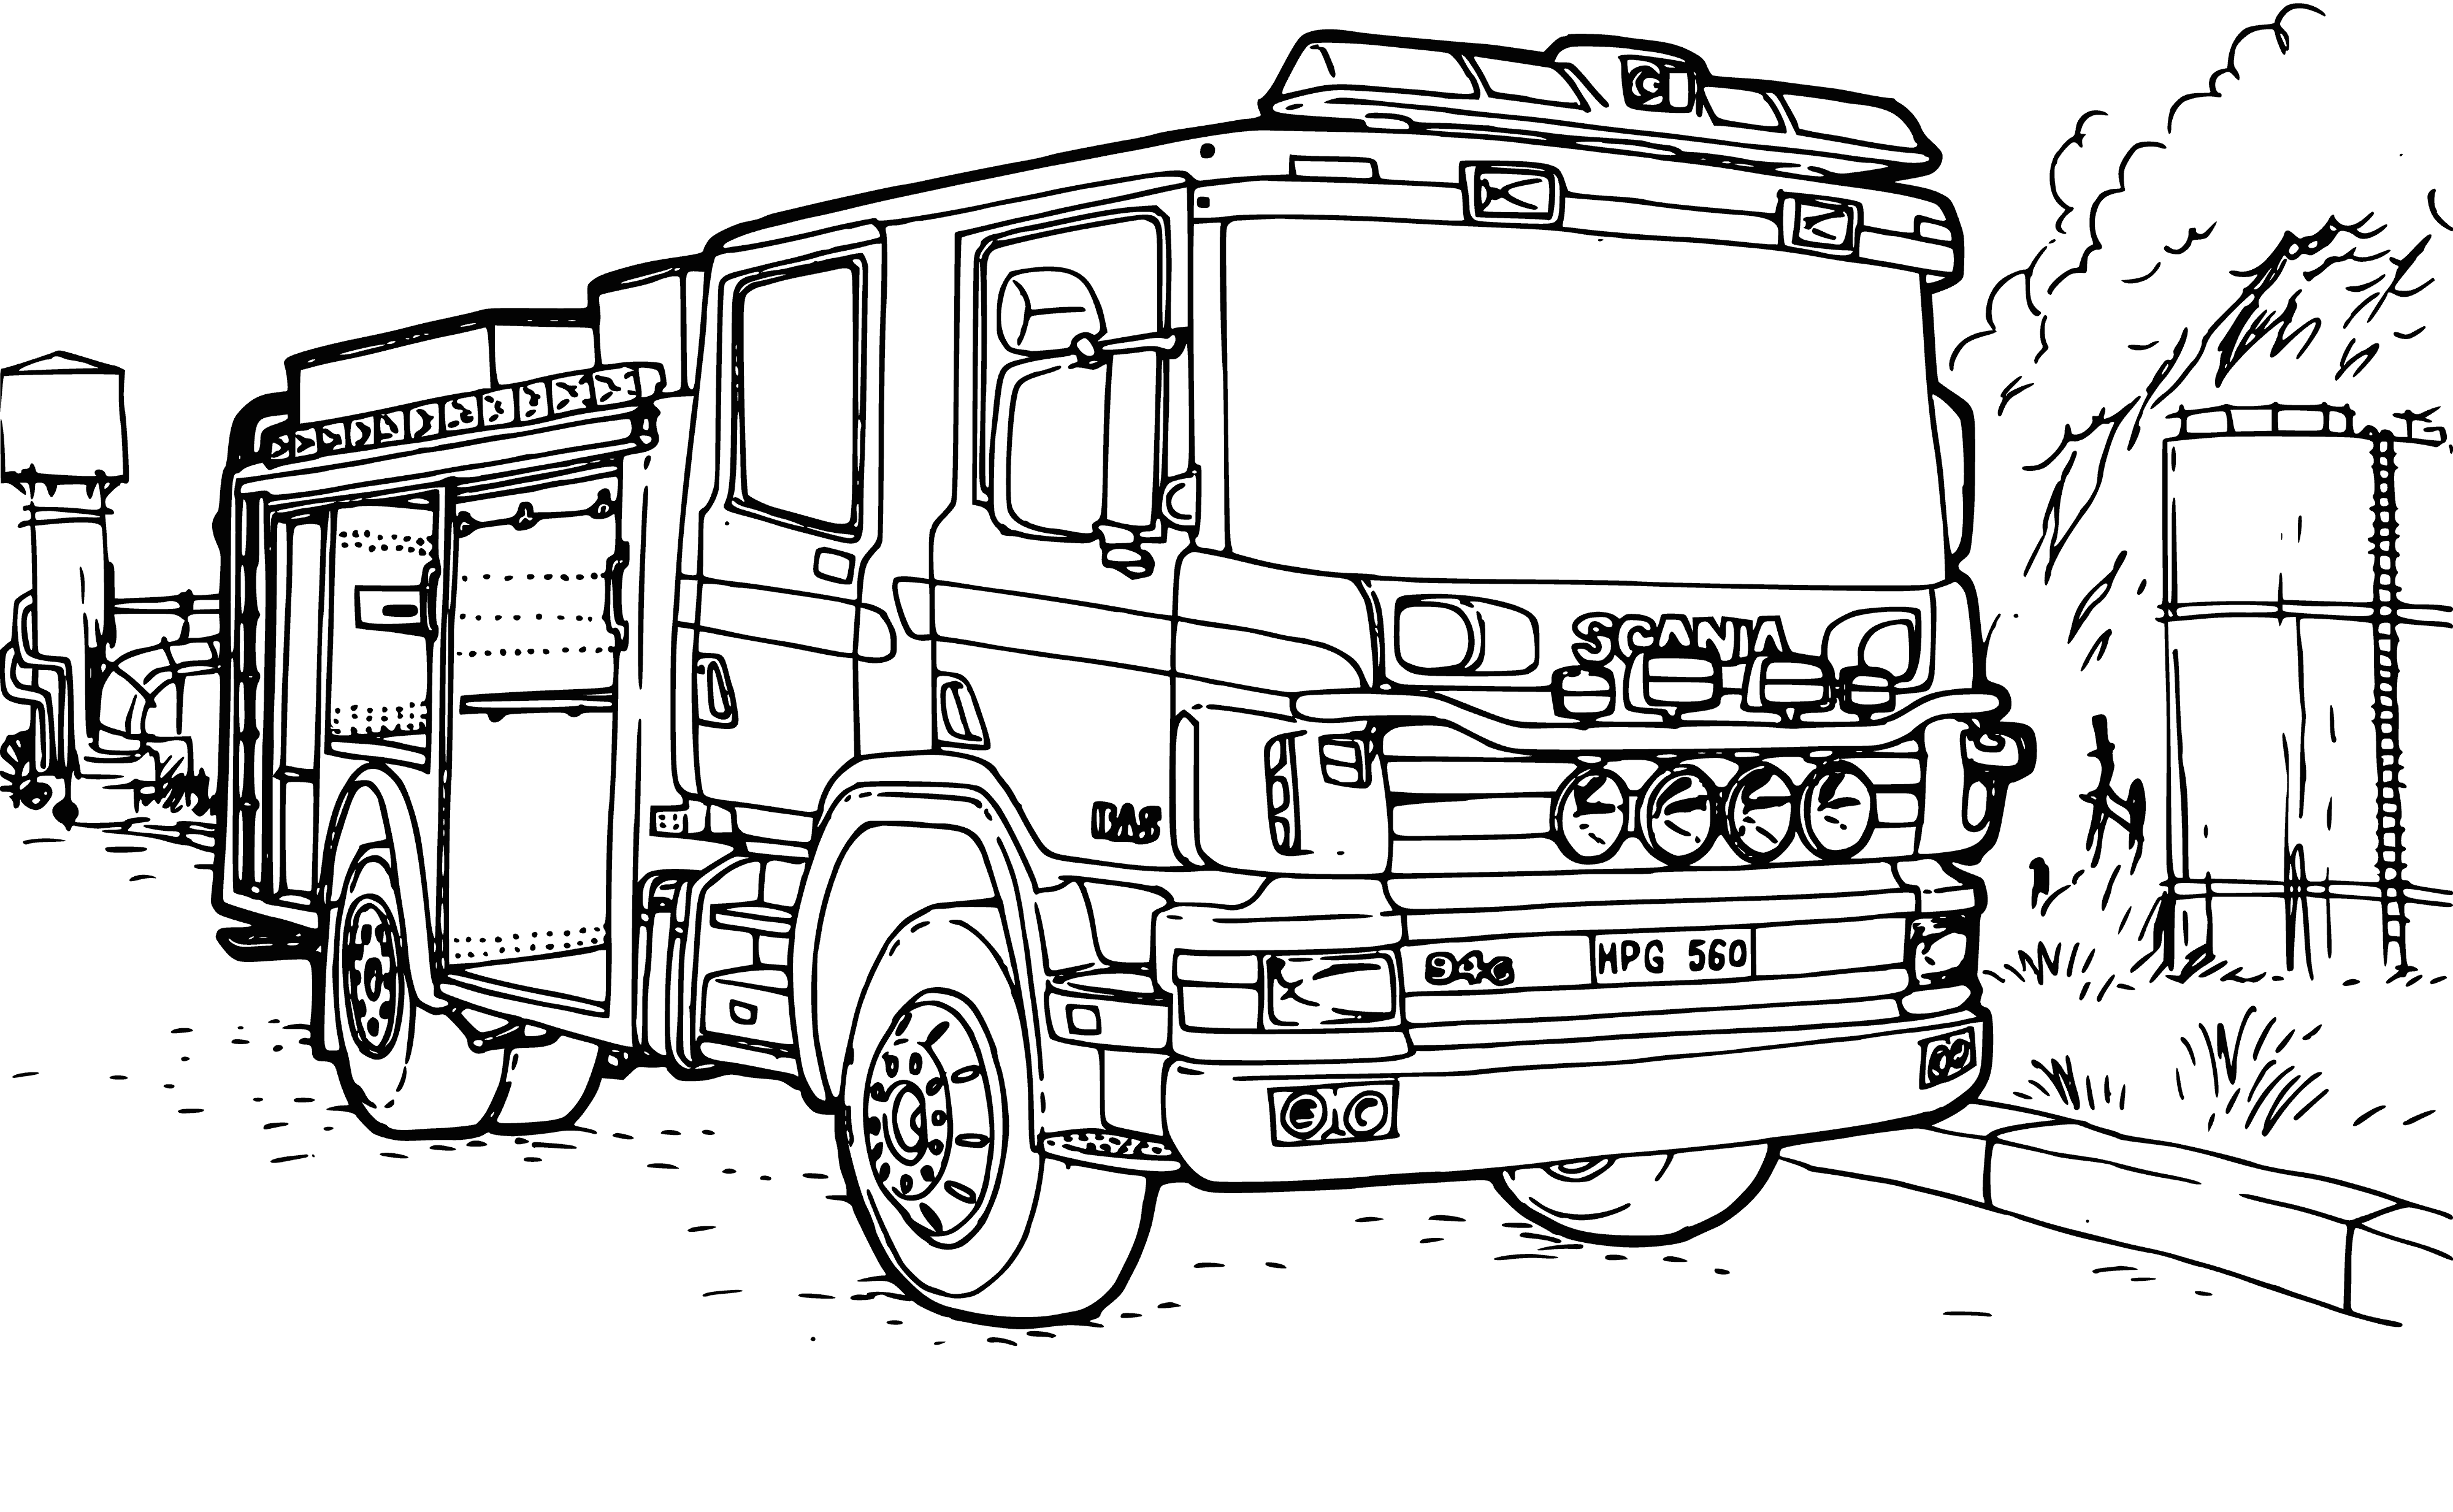 coloring page: Fire truck w/ladder at building labeled "Firefighters and Police". #firstresponders